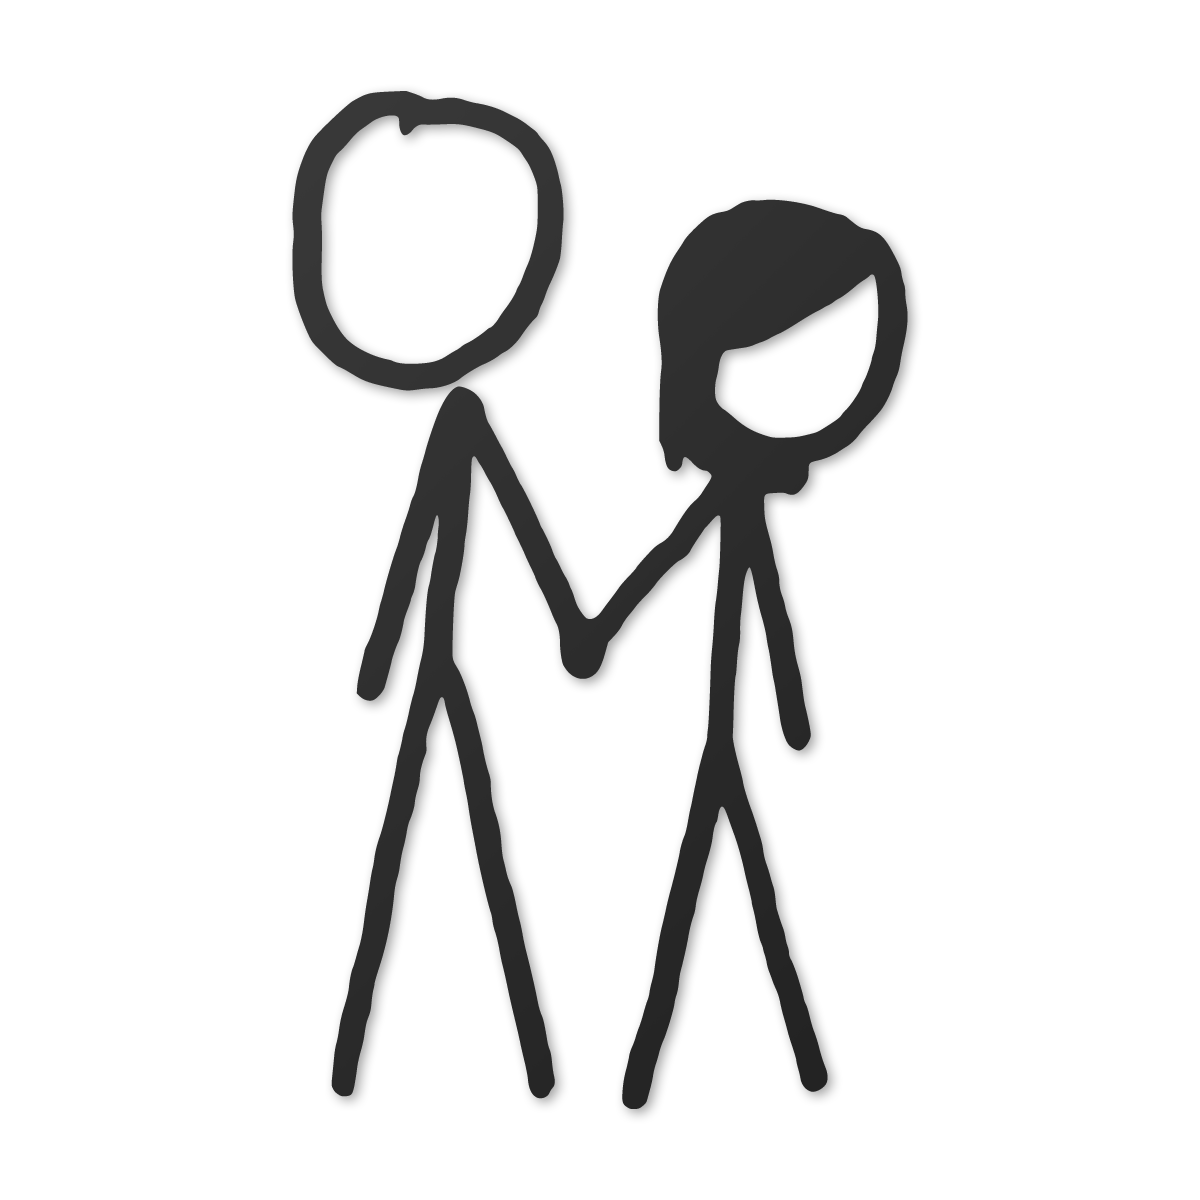 xkcd stick figures